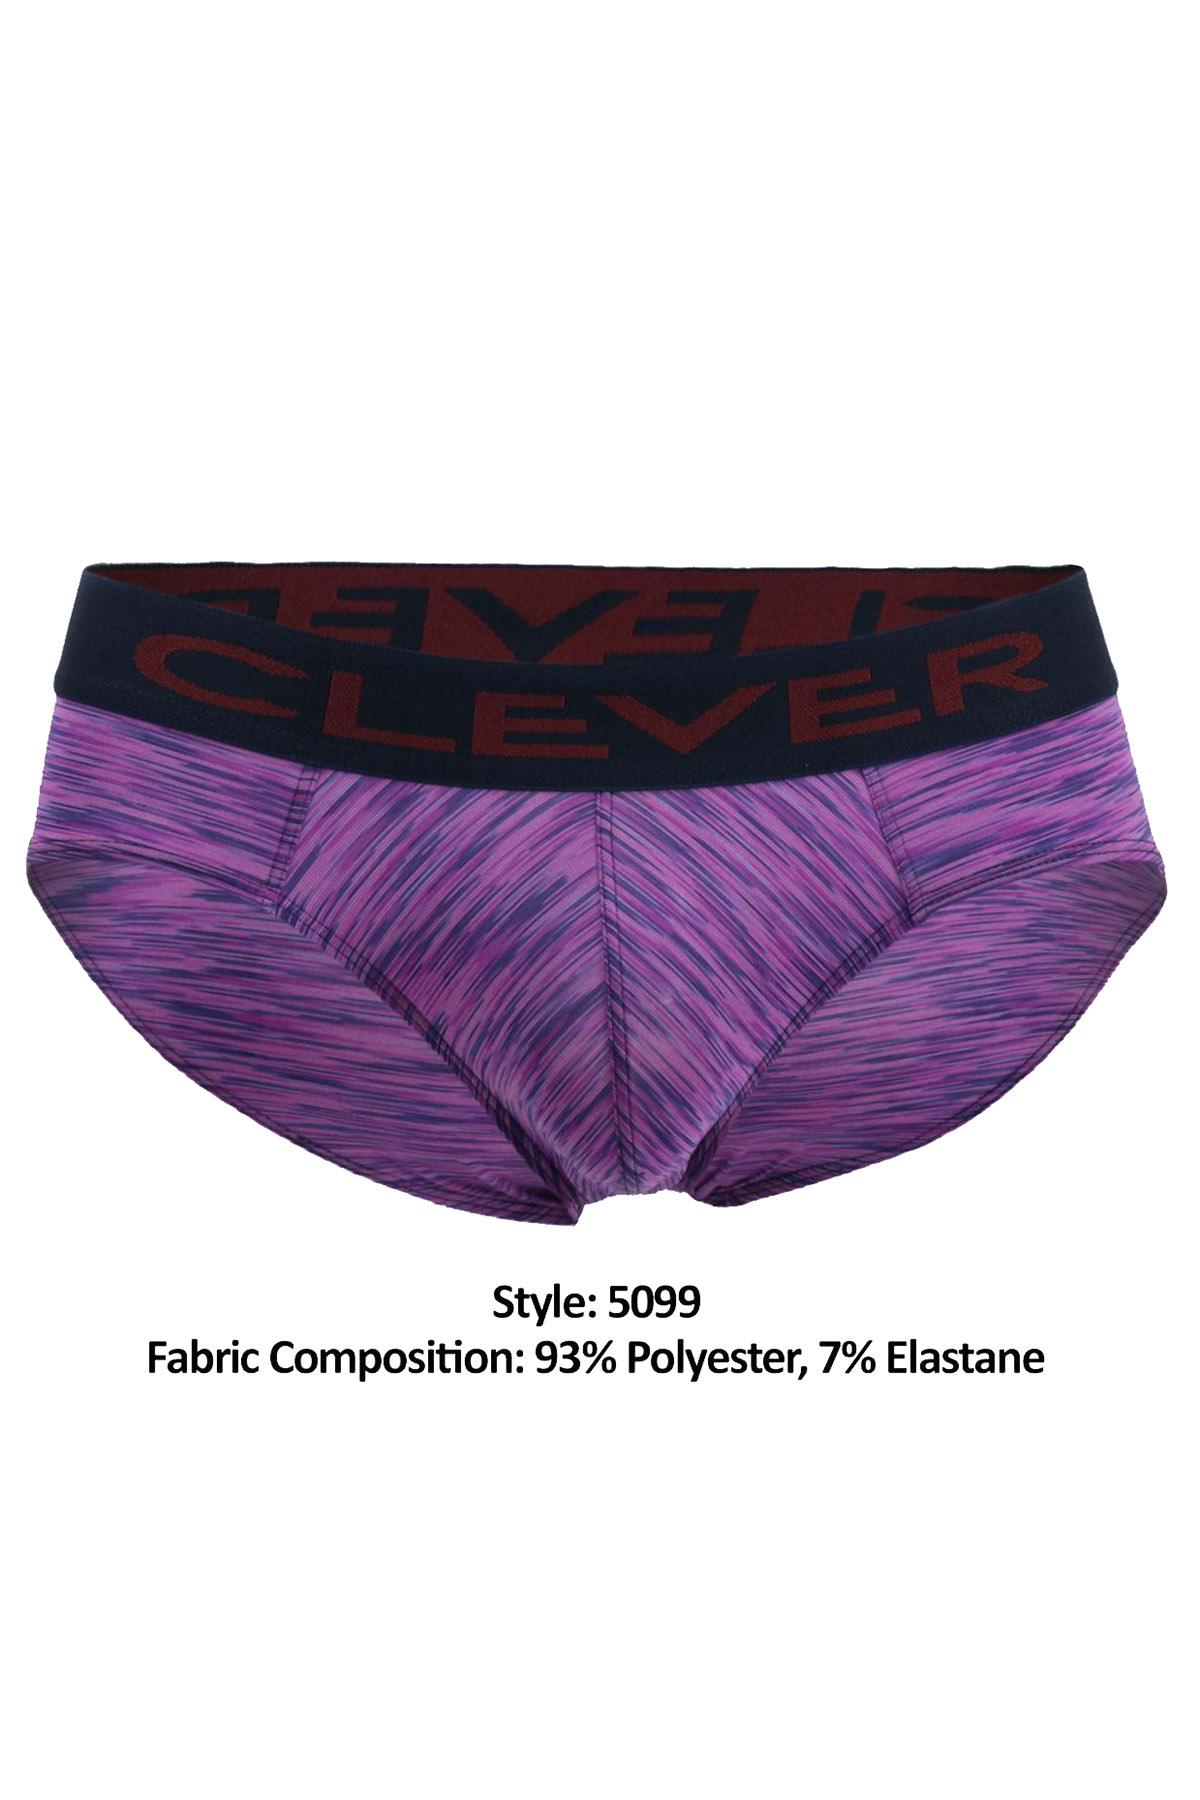 Clever Grape/Navy Limited Edition Striped Latin Brief